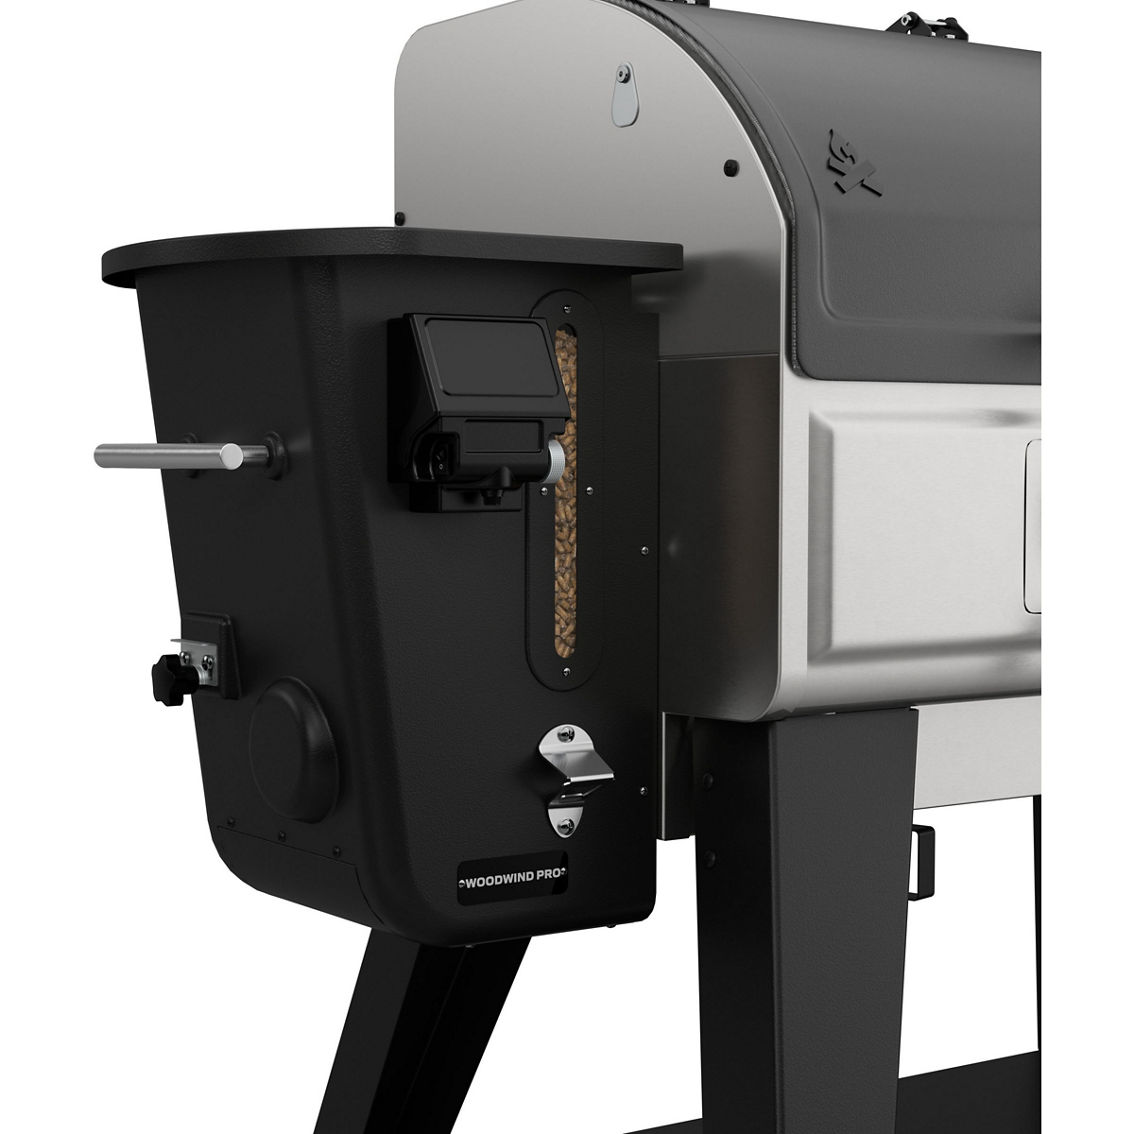 Camp Chef Woodwind Pro WiFi 36 Pellet Grill - Image 6 of 8